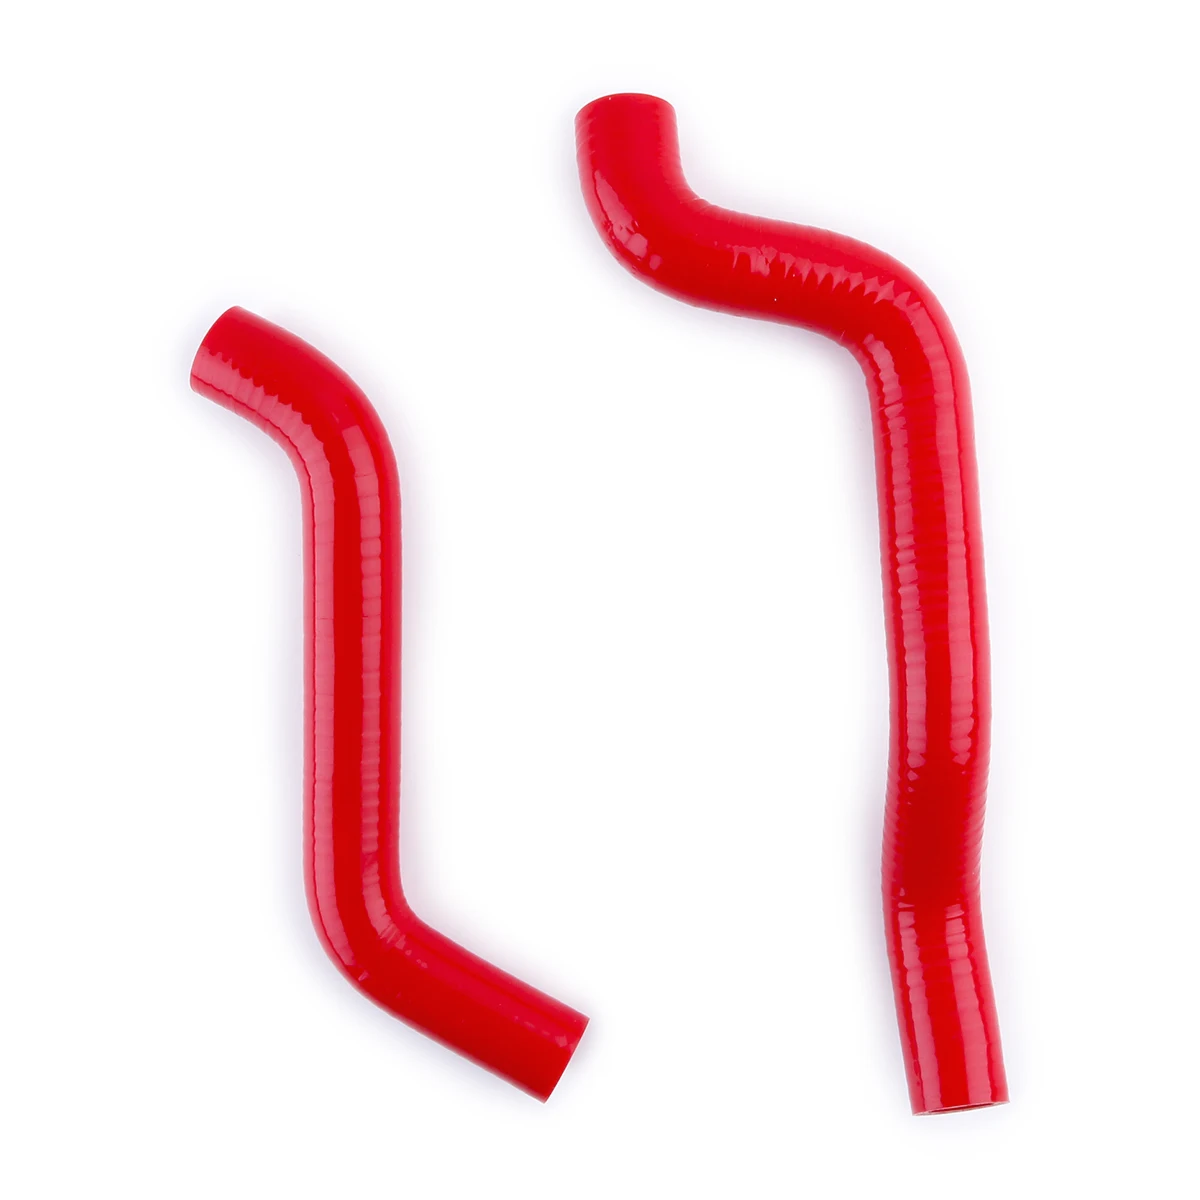 For Polaris Outlaw 500 2006 2007 IRS ATV Silicone Coolant Radiator Hoses Piping Tubes Kit 2Pcs 10 Colors